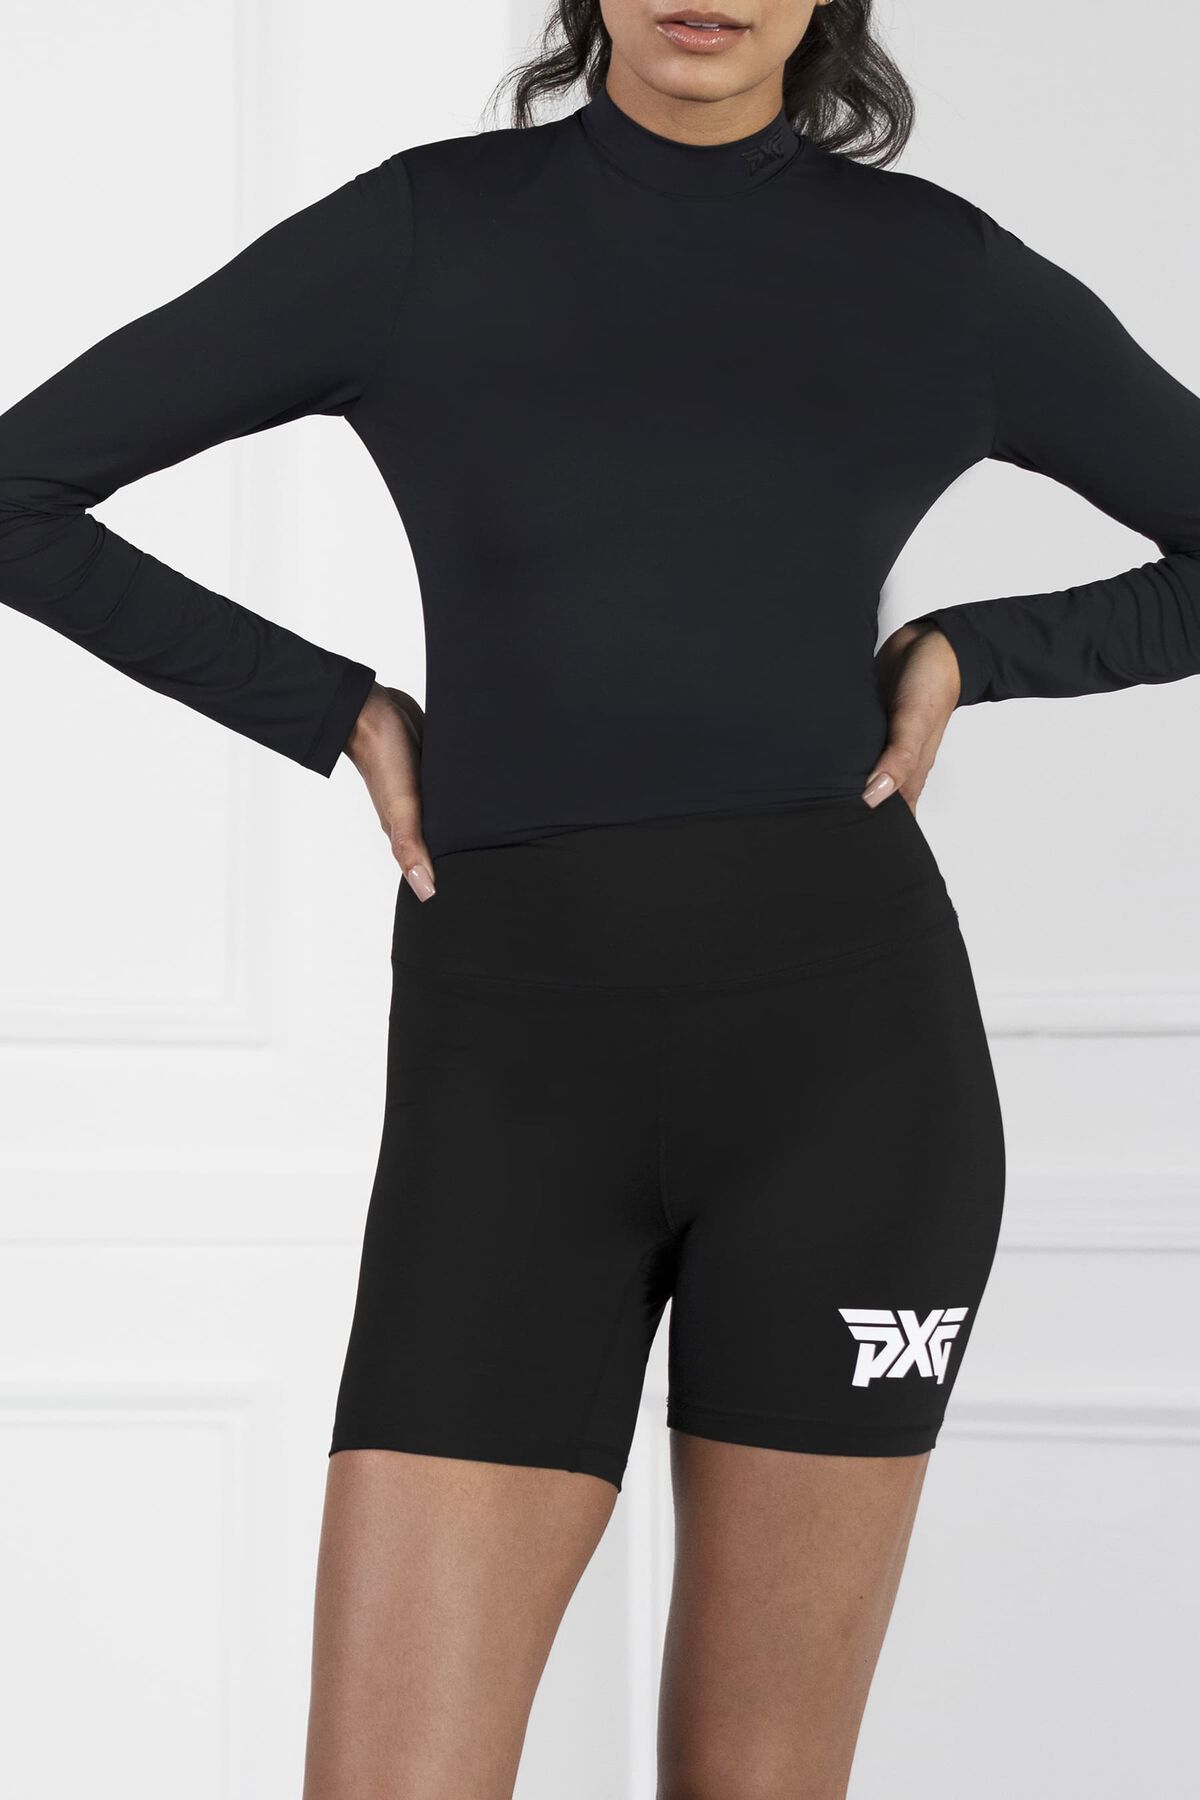 High Waisted Biker Shorts  Shop the Highest Quality Golf Apparel, Gear,  Accessories and Golf Clubs at PXG